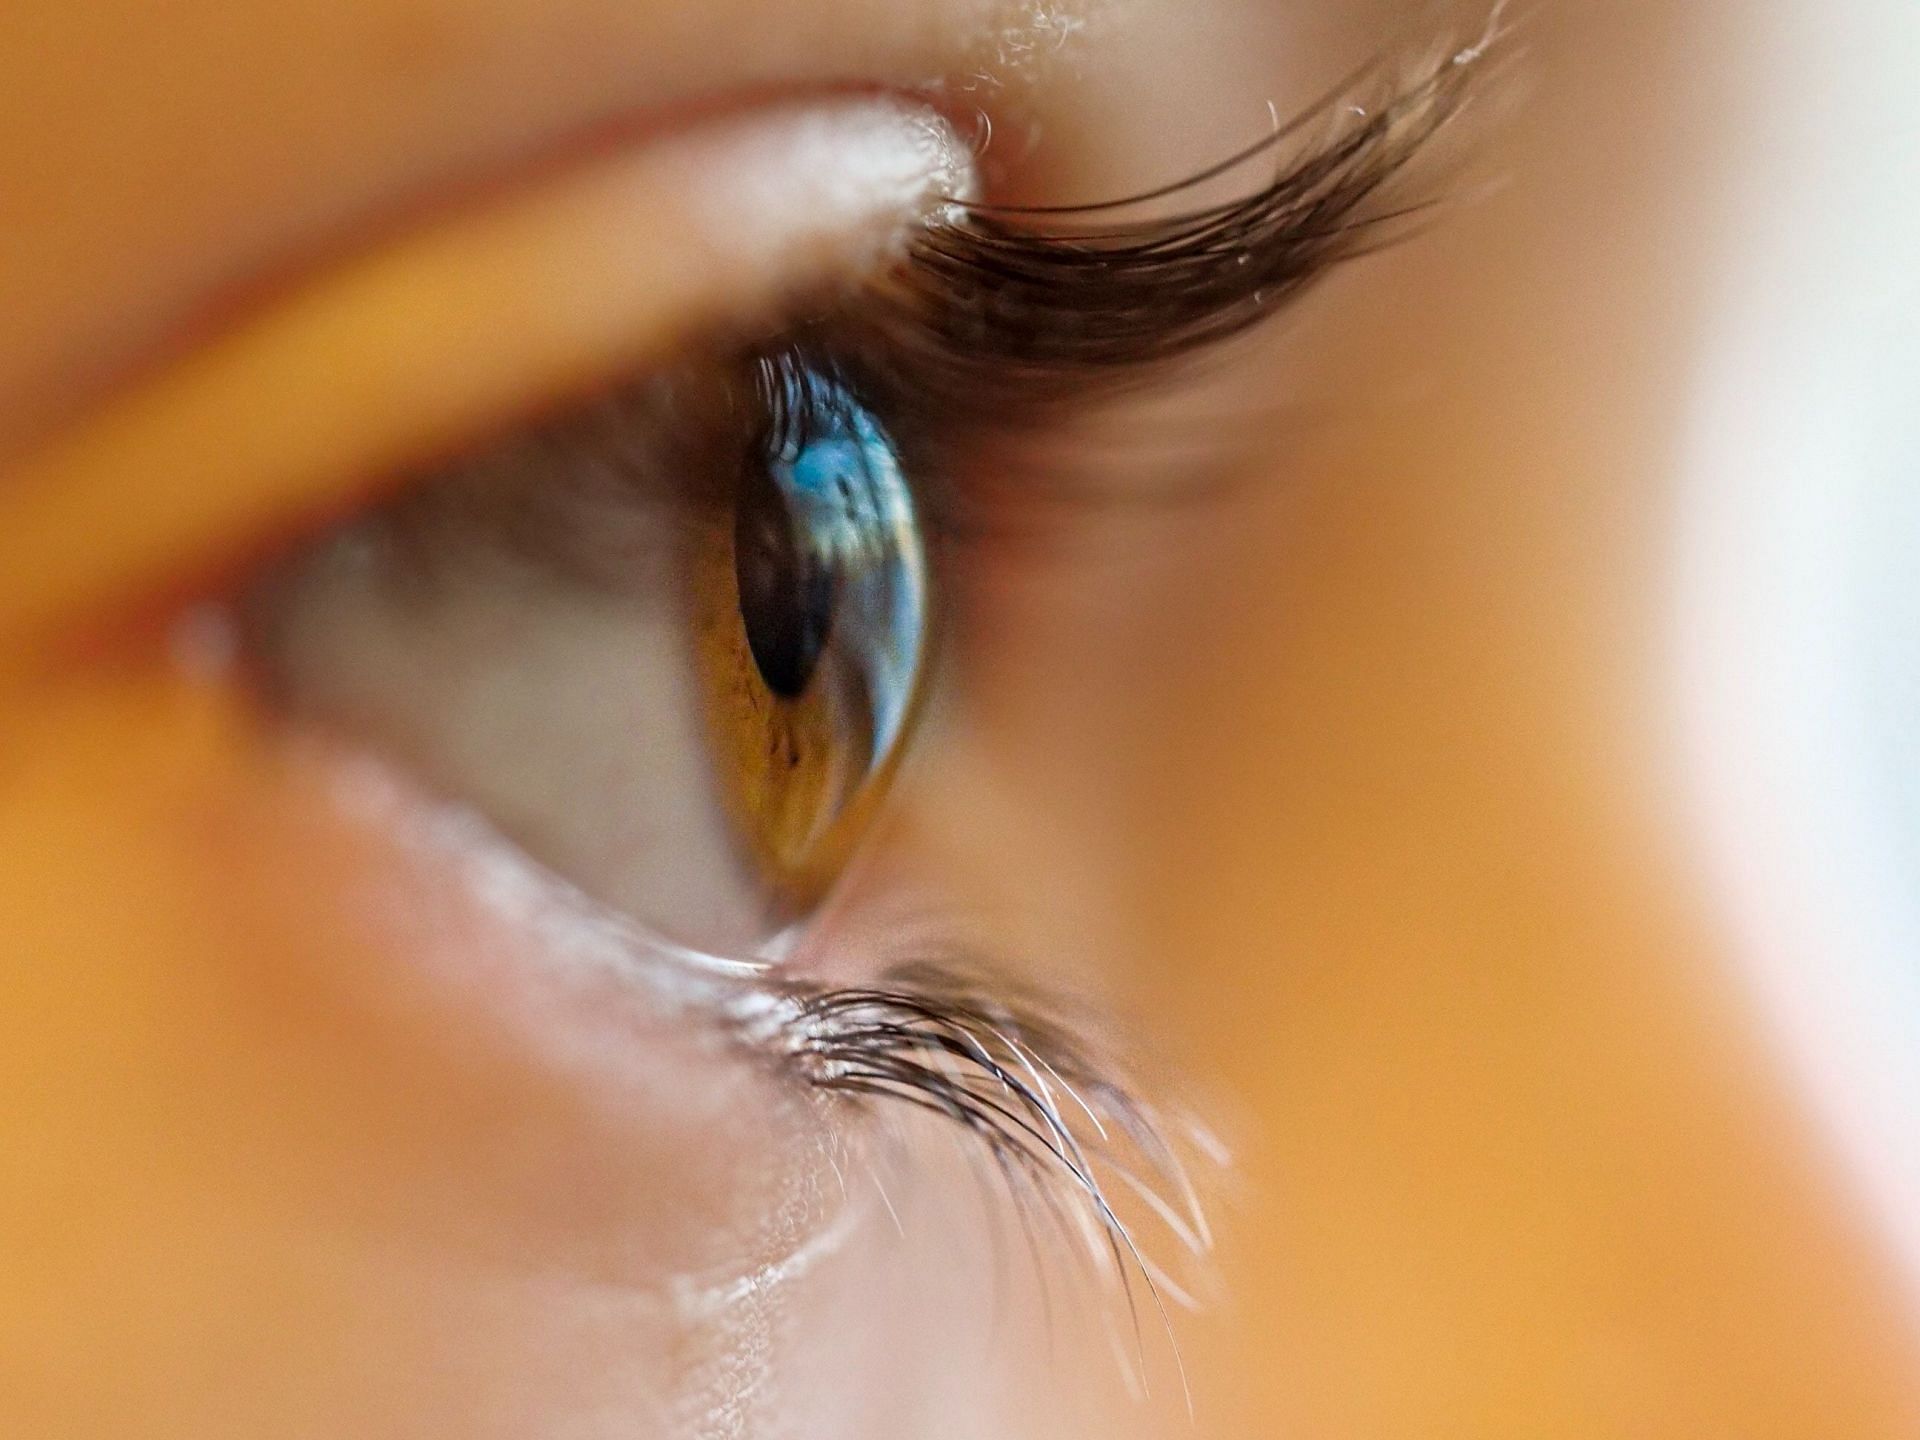 By properly wearing and caring for your contact lenses, you can enjoy the benefits of clear vision without the need for glasses (Image via Unsplash)